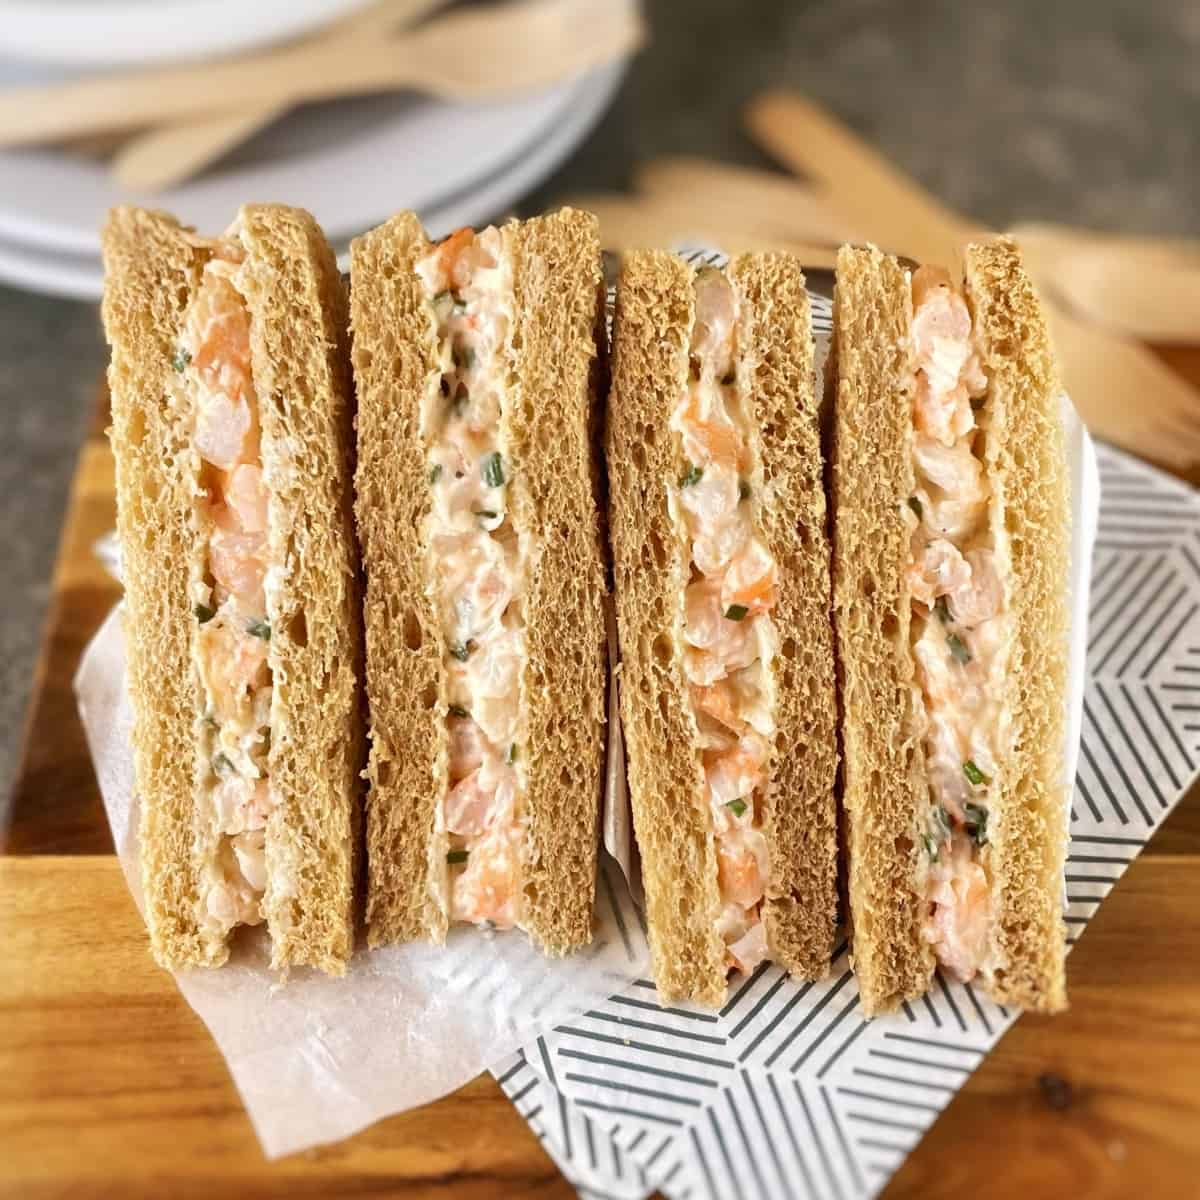 Sandwiches with prawn filling on a wooden board with napkins.